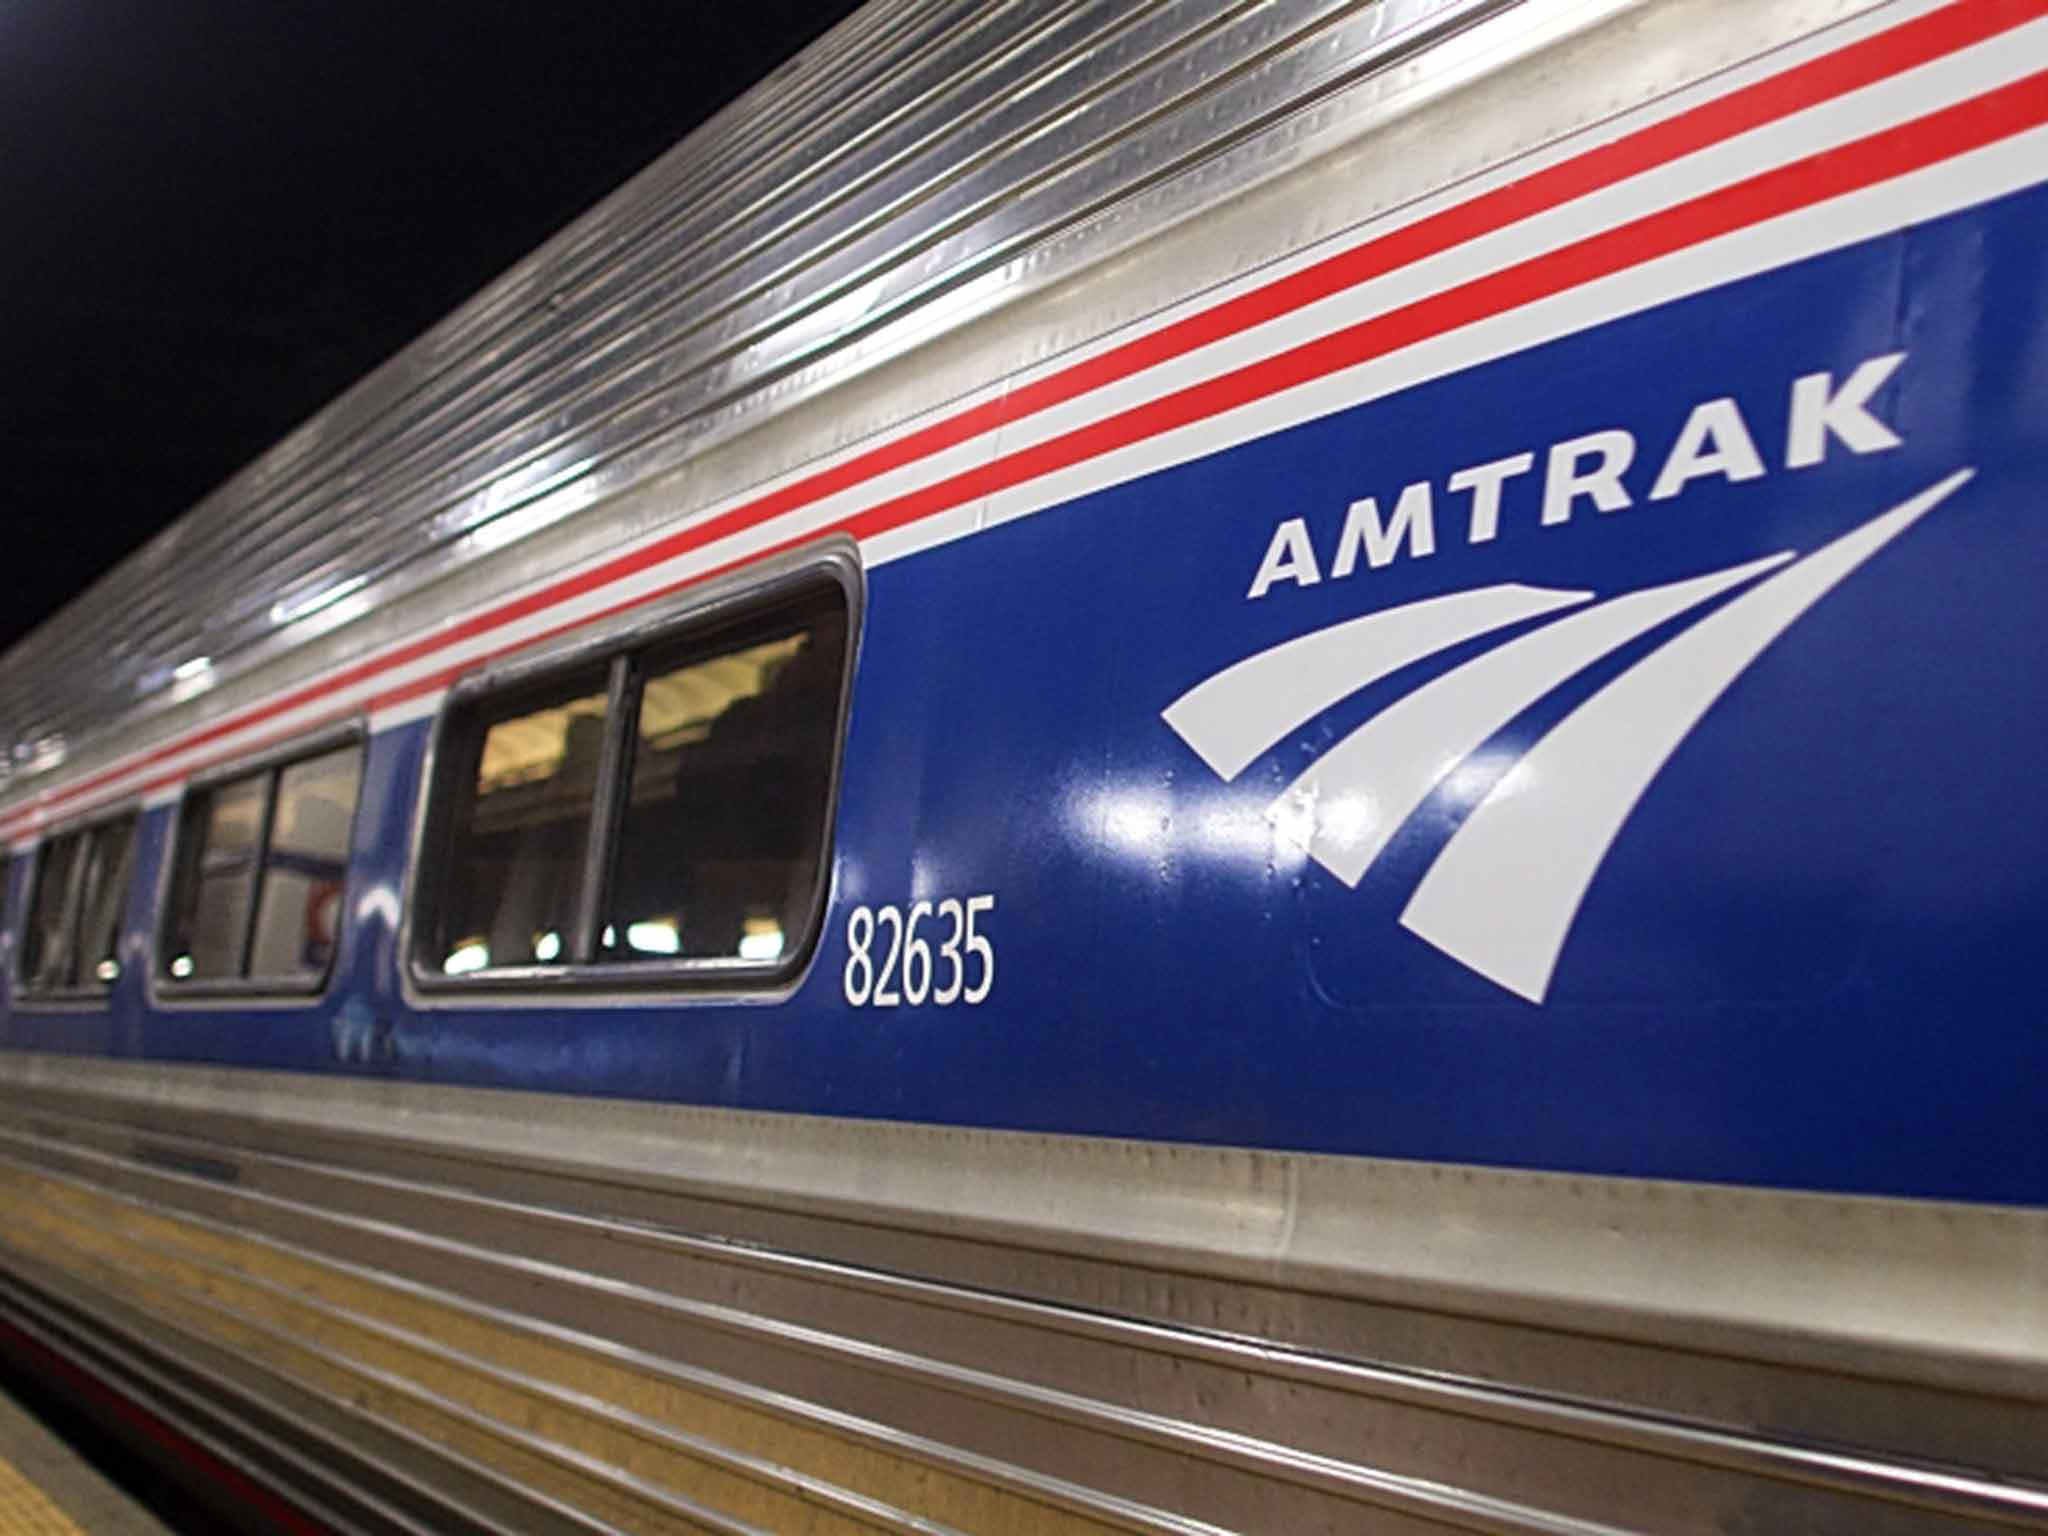 Amtrak has just reported its best ever year but the passenger experience could be better